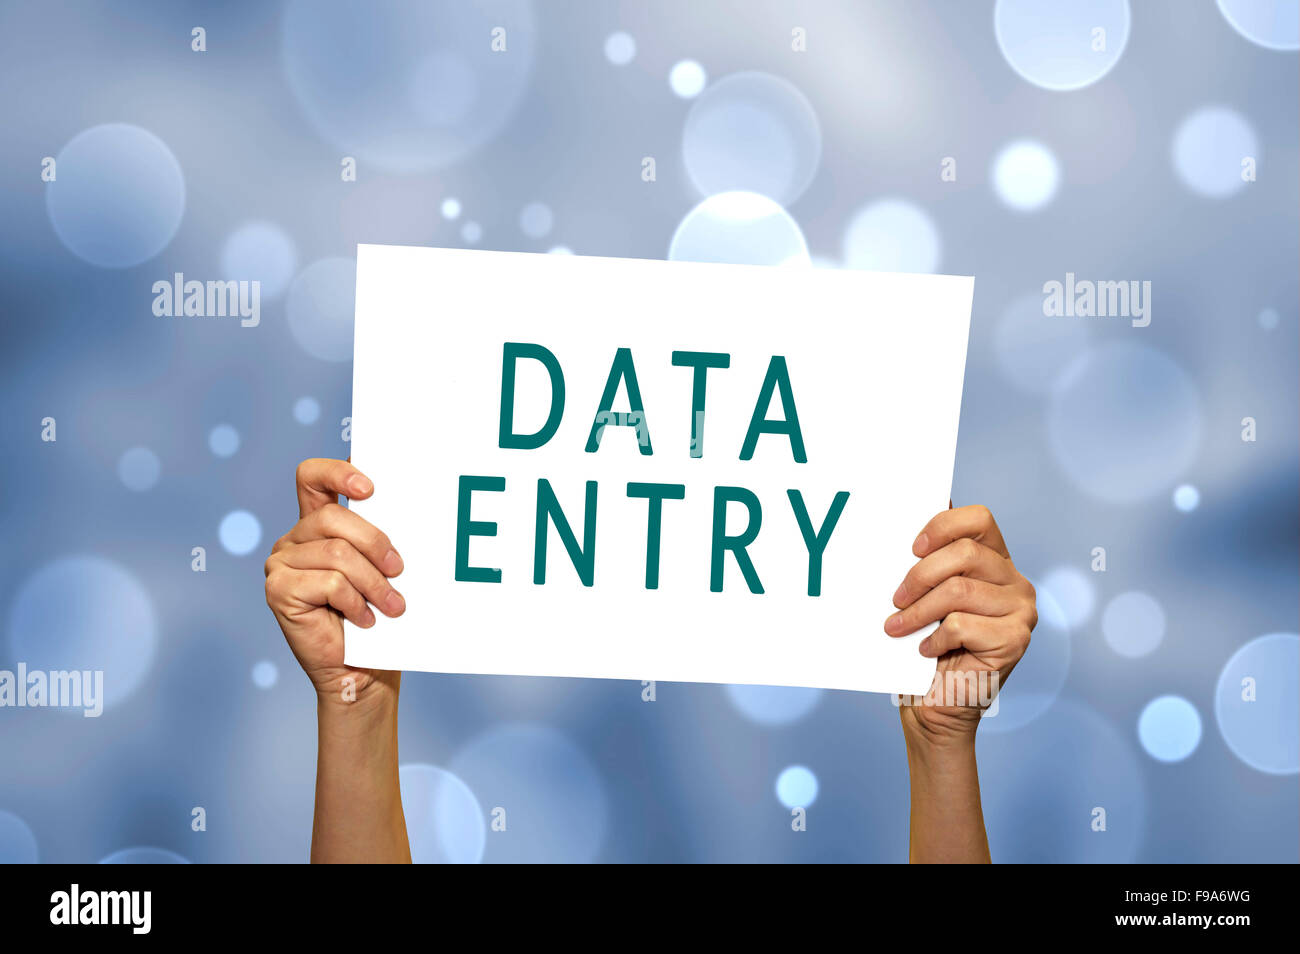 DATA ENTRY card in hand with abstract light background. Selective focus. Stock Photo